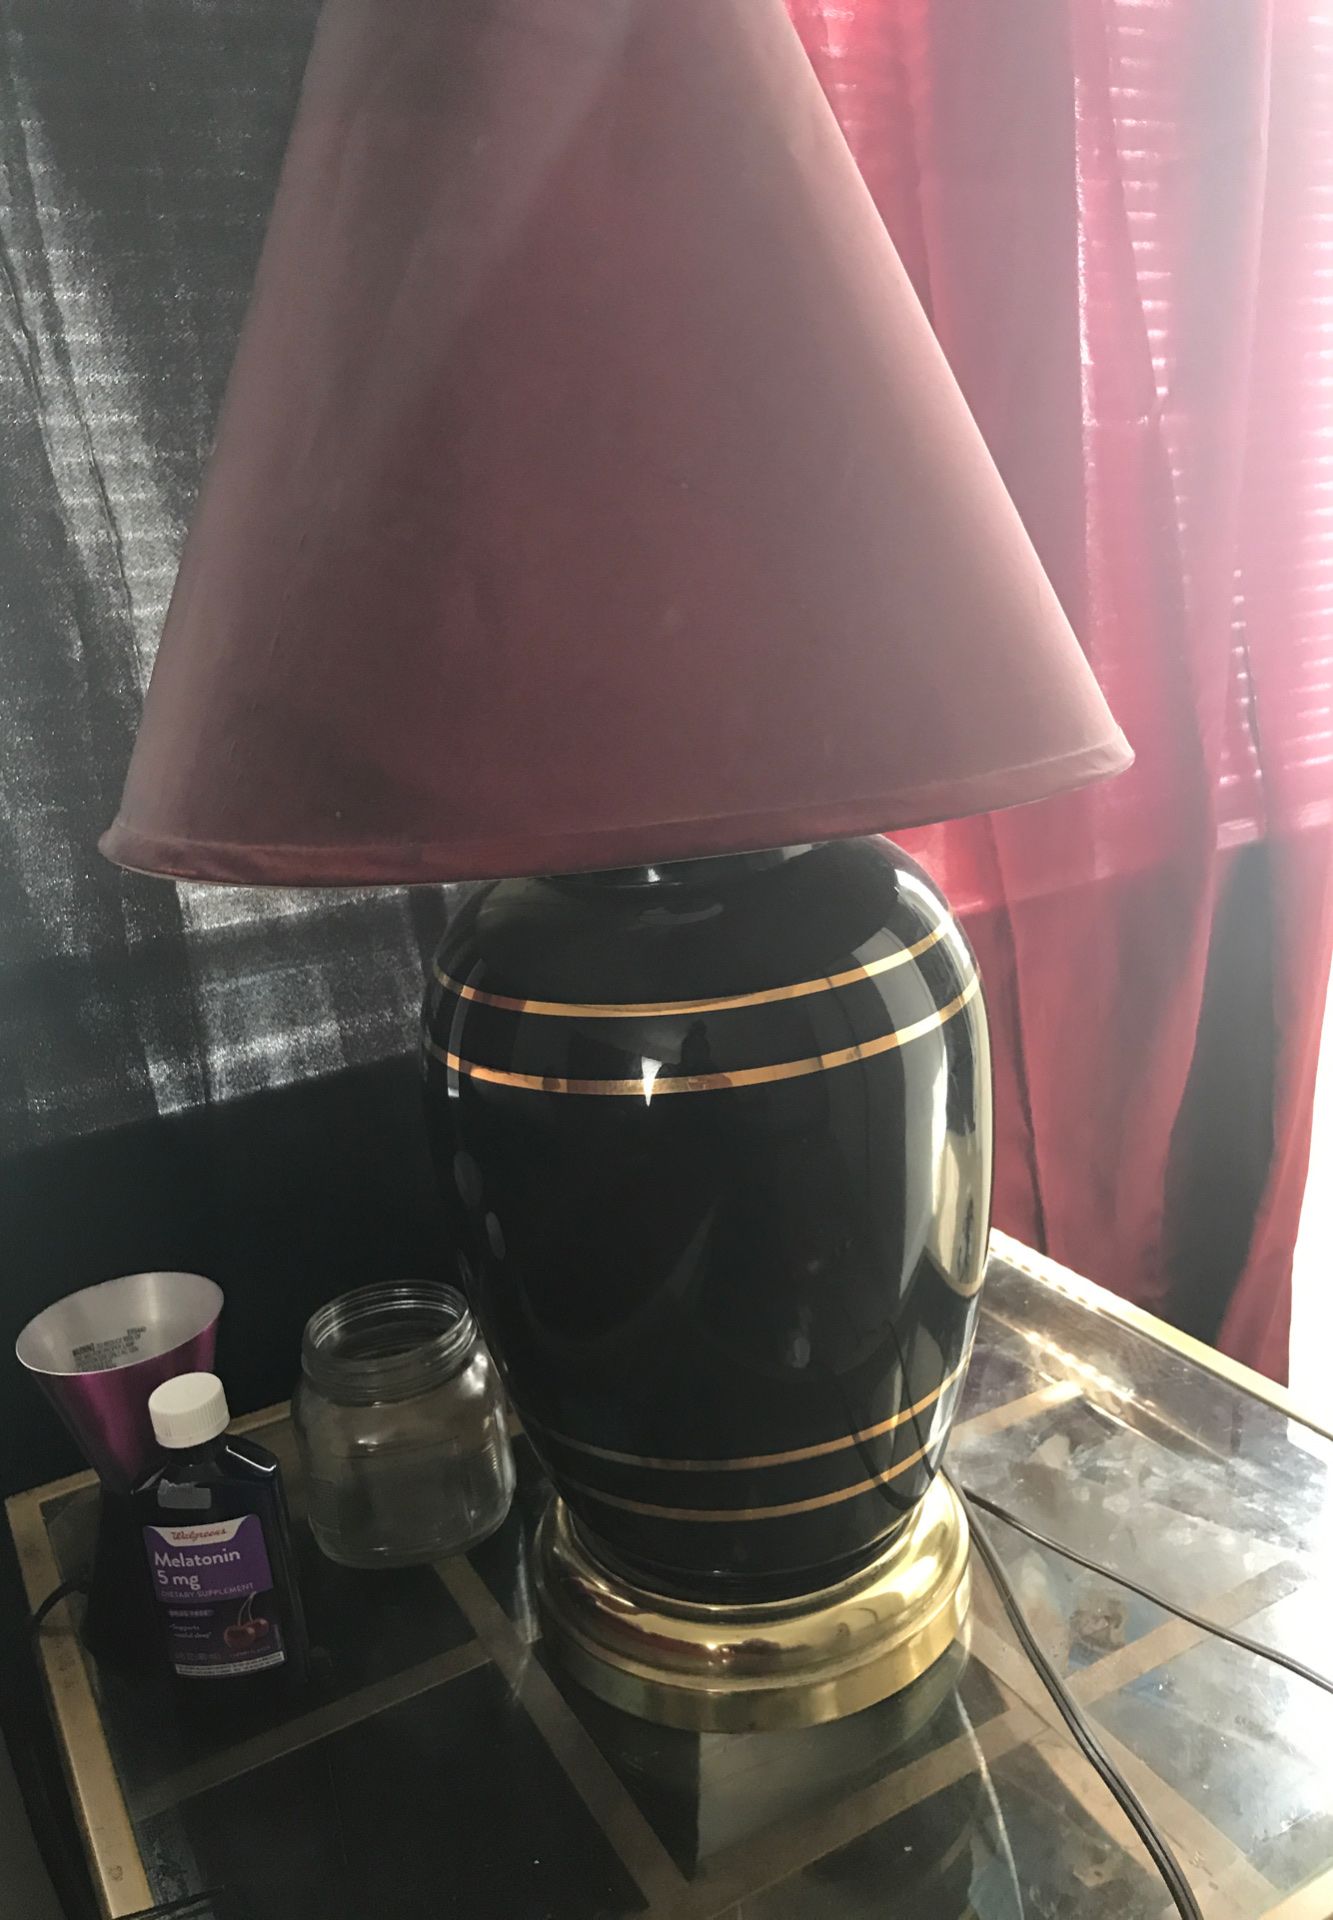 Two nice lamps